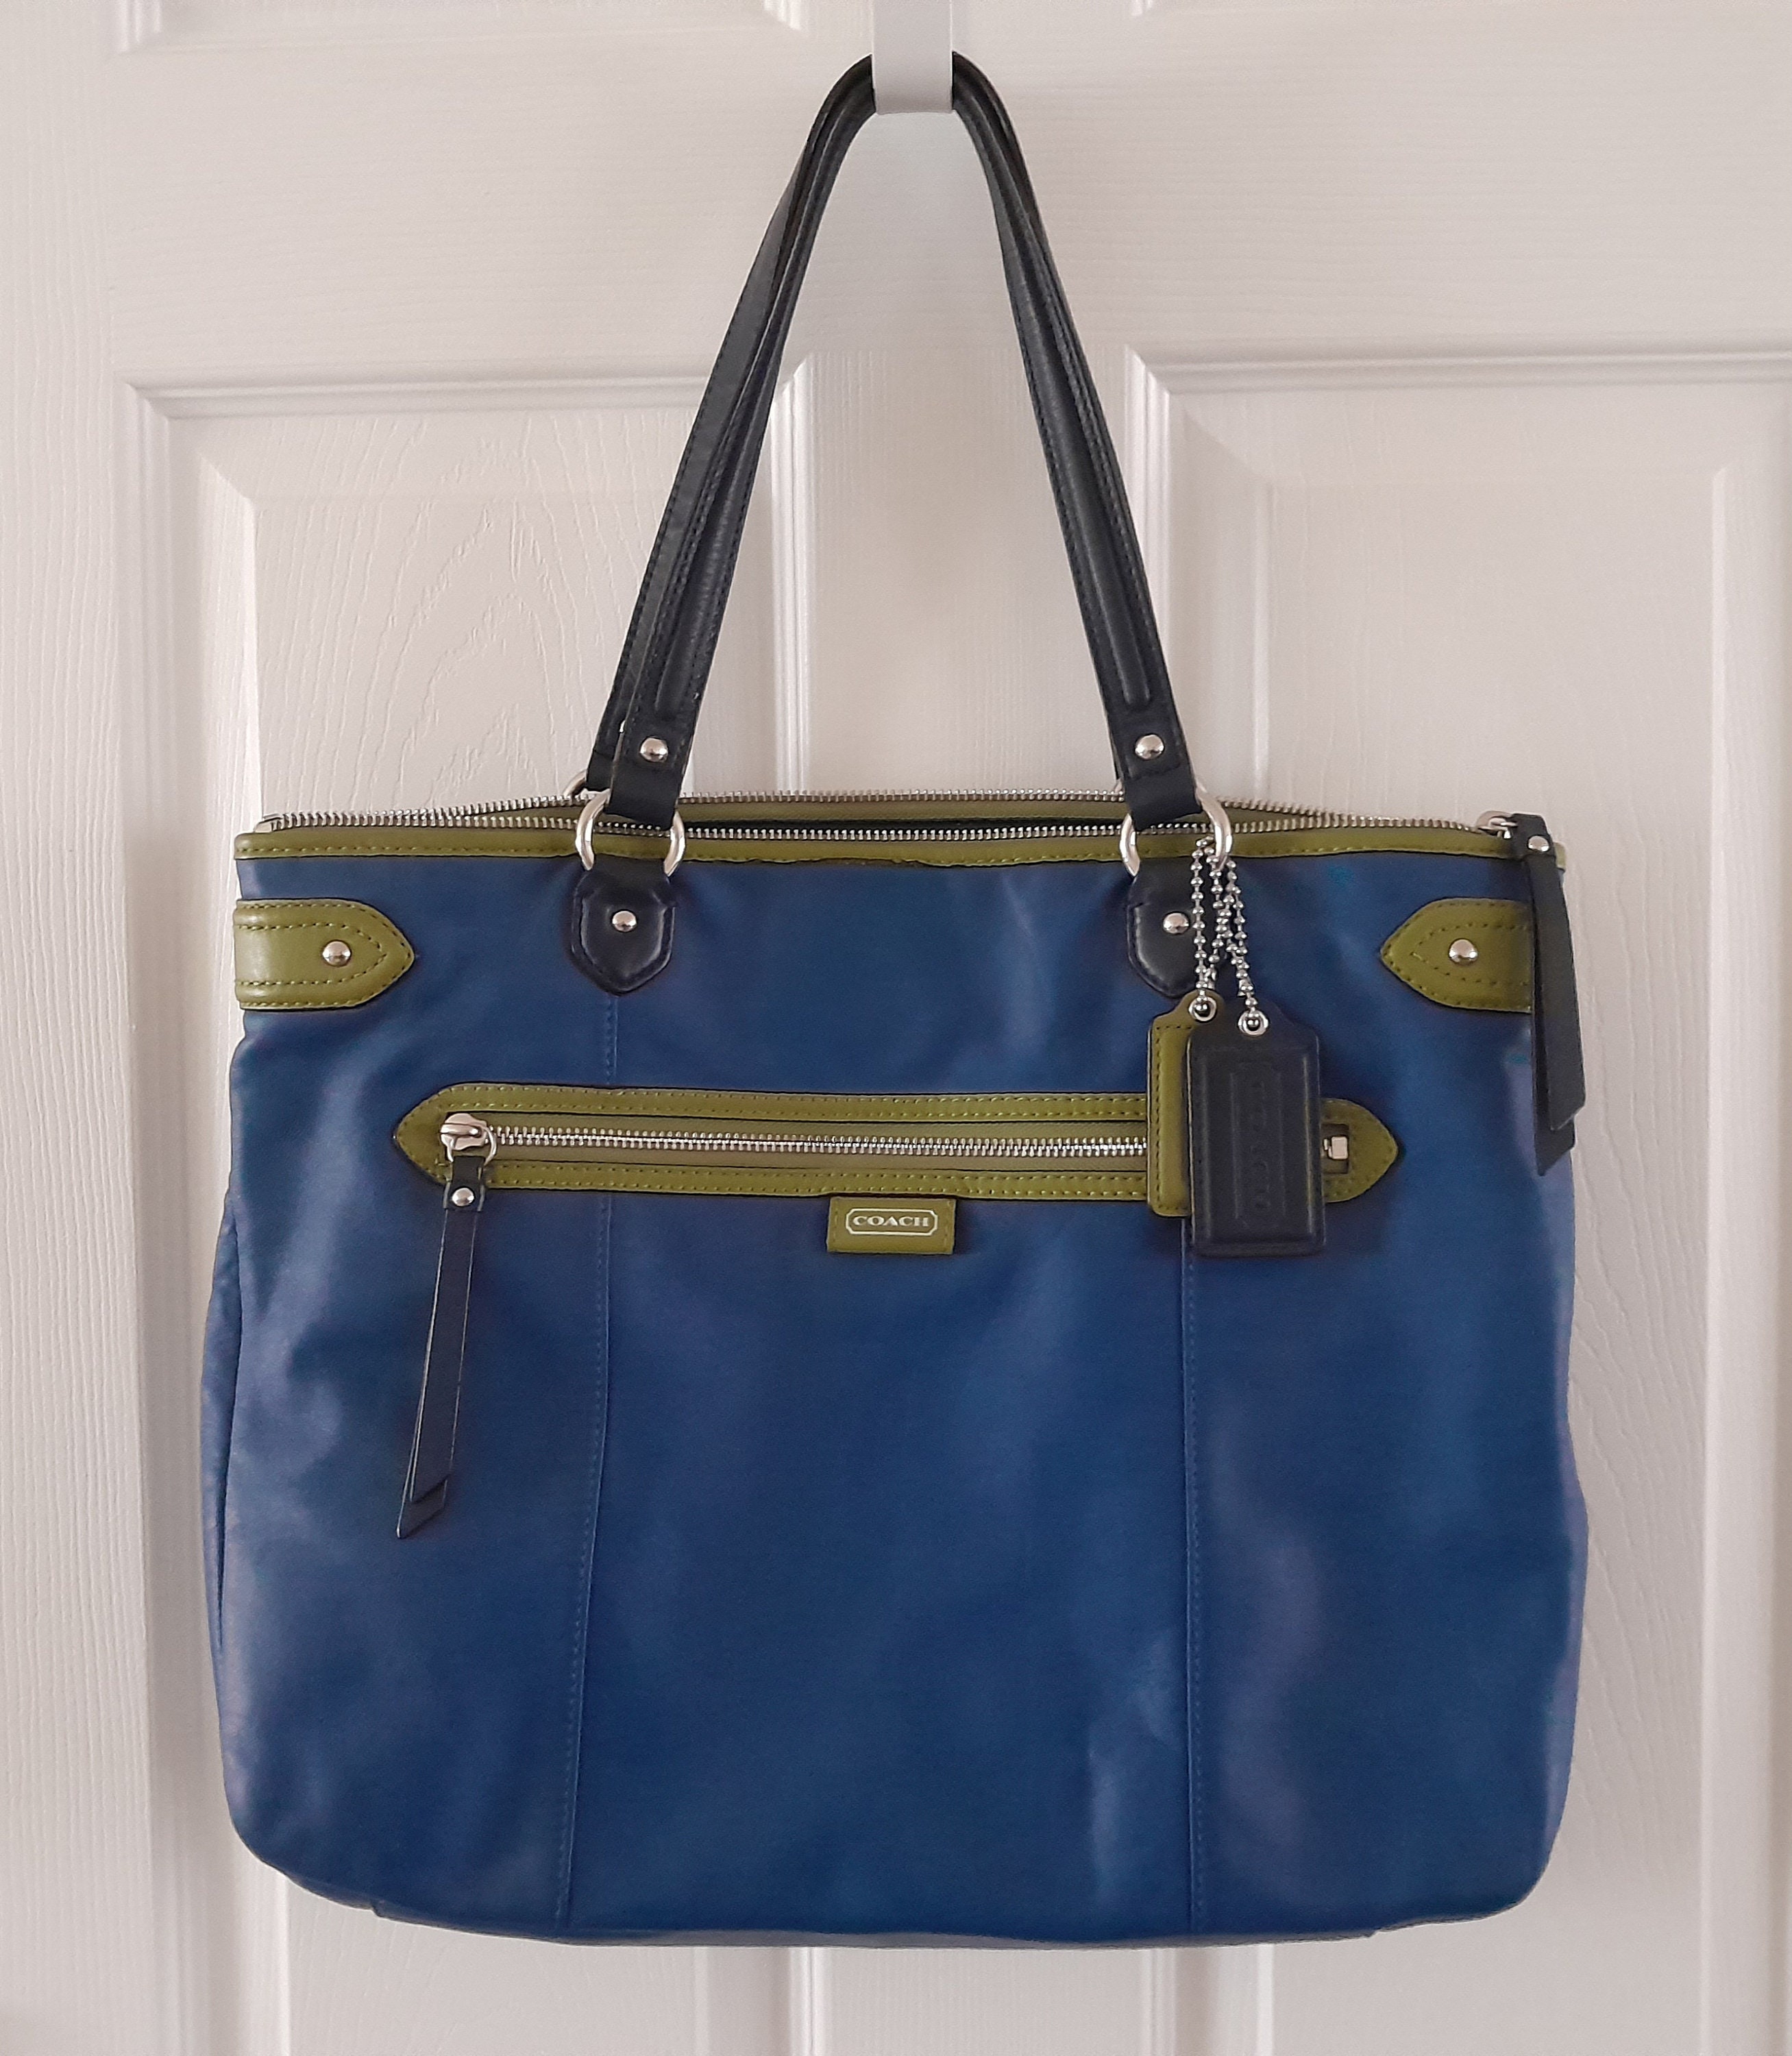 Coach - Authenticated Handbag - Leather Green Plain for Women, Very Good Condition